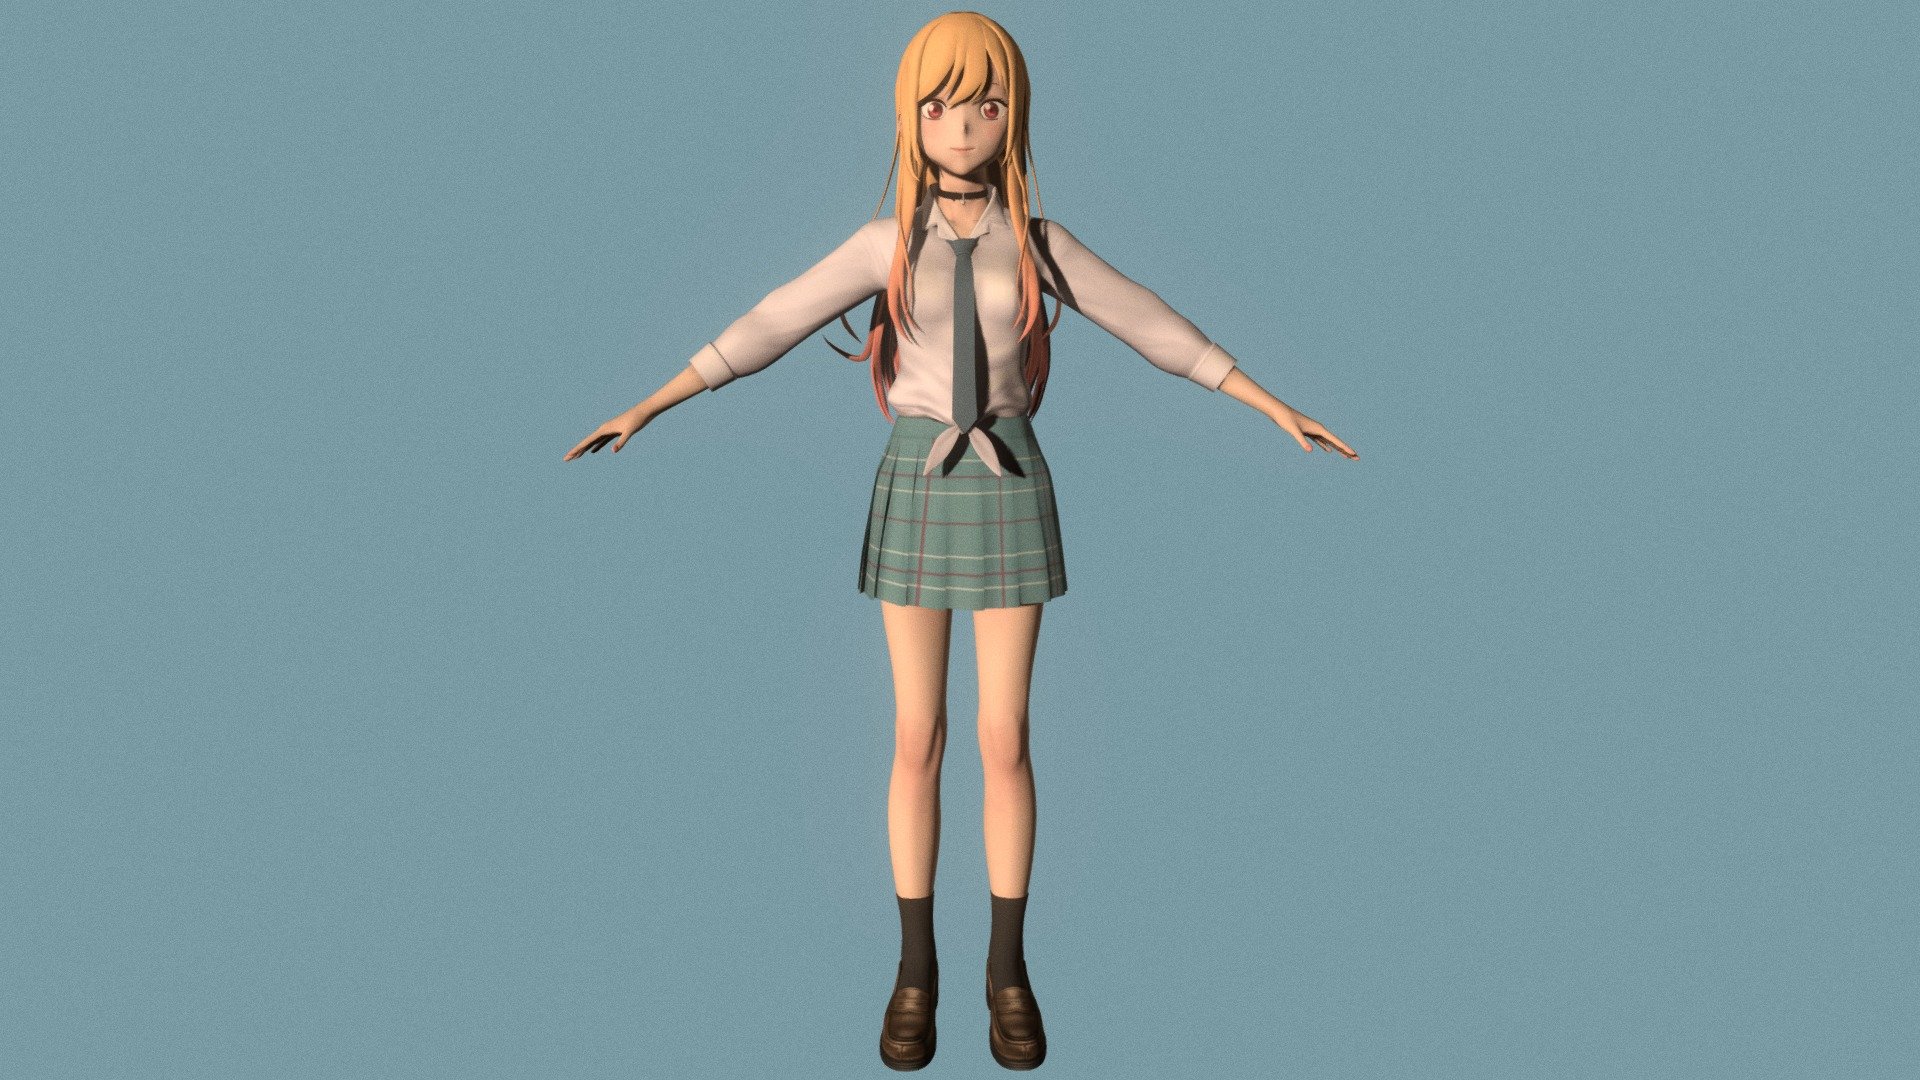 T-pose rigged model of anime girl Marin Kitagawa (My Dress-Up Darling).

Body and clothings are rigged and skinned by 3ds Max CAT system.

Eye direction and facial animation controlled by Morpher modifier / Shape Keys / Blendshape.

This product include .FBX (ver. 7200) and .MAX (ver. 2010) files.

3ds Max version is turbosmoothed to give a high quality render (as you can see here).

Original main body mesh have ~7.000 polys.

This 3D model may need some tweaking to adapt the rig system to games engine and other platforms.

I support convert model to various file formats (the rig data will be lost in this process): 3DS; AI; ASE; DAE; DWF; DWG; DXF; FLT; HTR; IGS; M3G; MQO; OBJ; SAT; STL; W3D; WRL; X.

You can buy all of my models in one pack to save cost: https://sketchfab.com/3d-models/all-of-my-anime-girls-c5a56156994e4193b9e8fa21a3b8360b

And I can make commission models.

If you have any questions, please leave a comment or contact me via my email 3d.eden.project@gmail.com 3d model